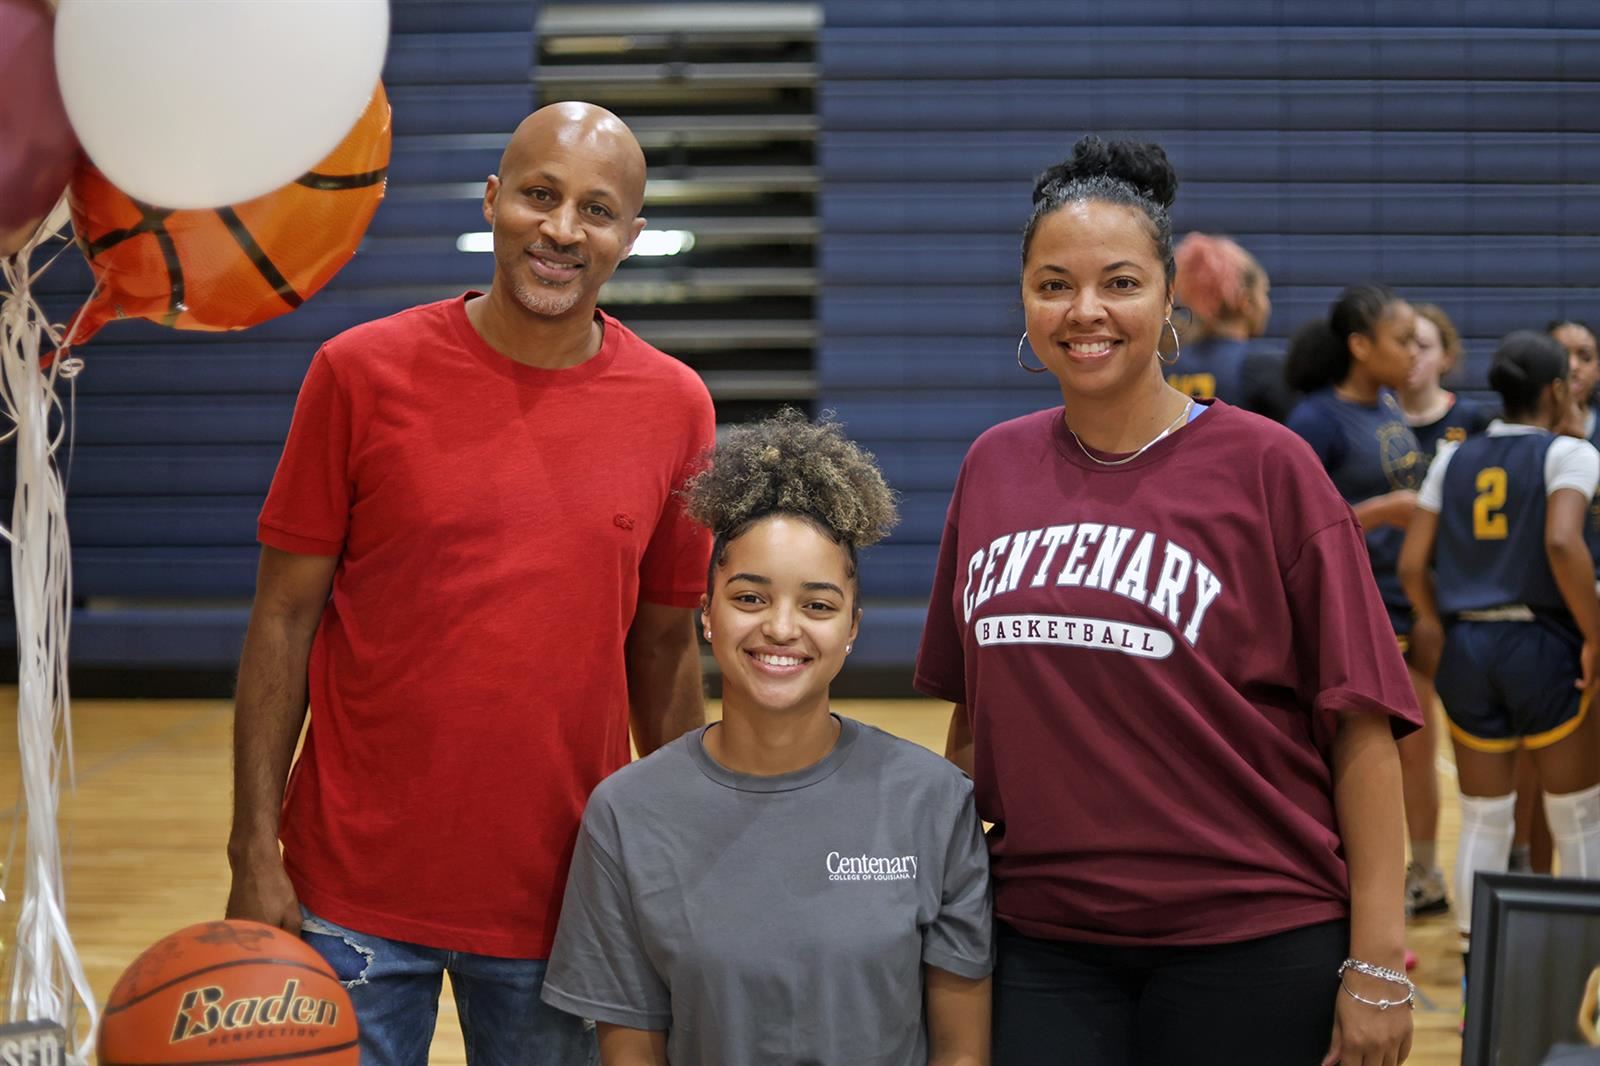 Cypress Ranch High School senior Alexis Duhon, seated, signed a letter of intent to play basketball at Centenary College.